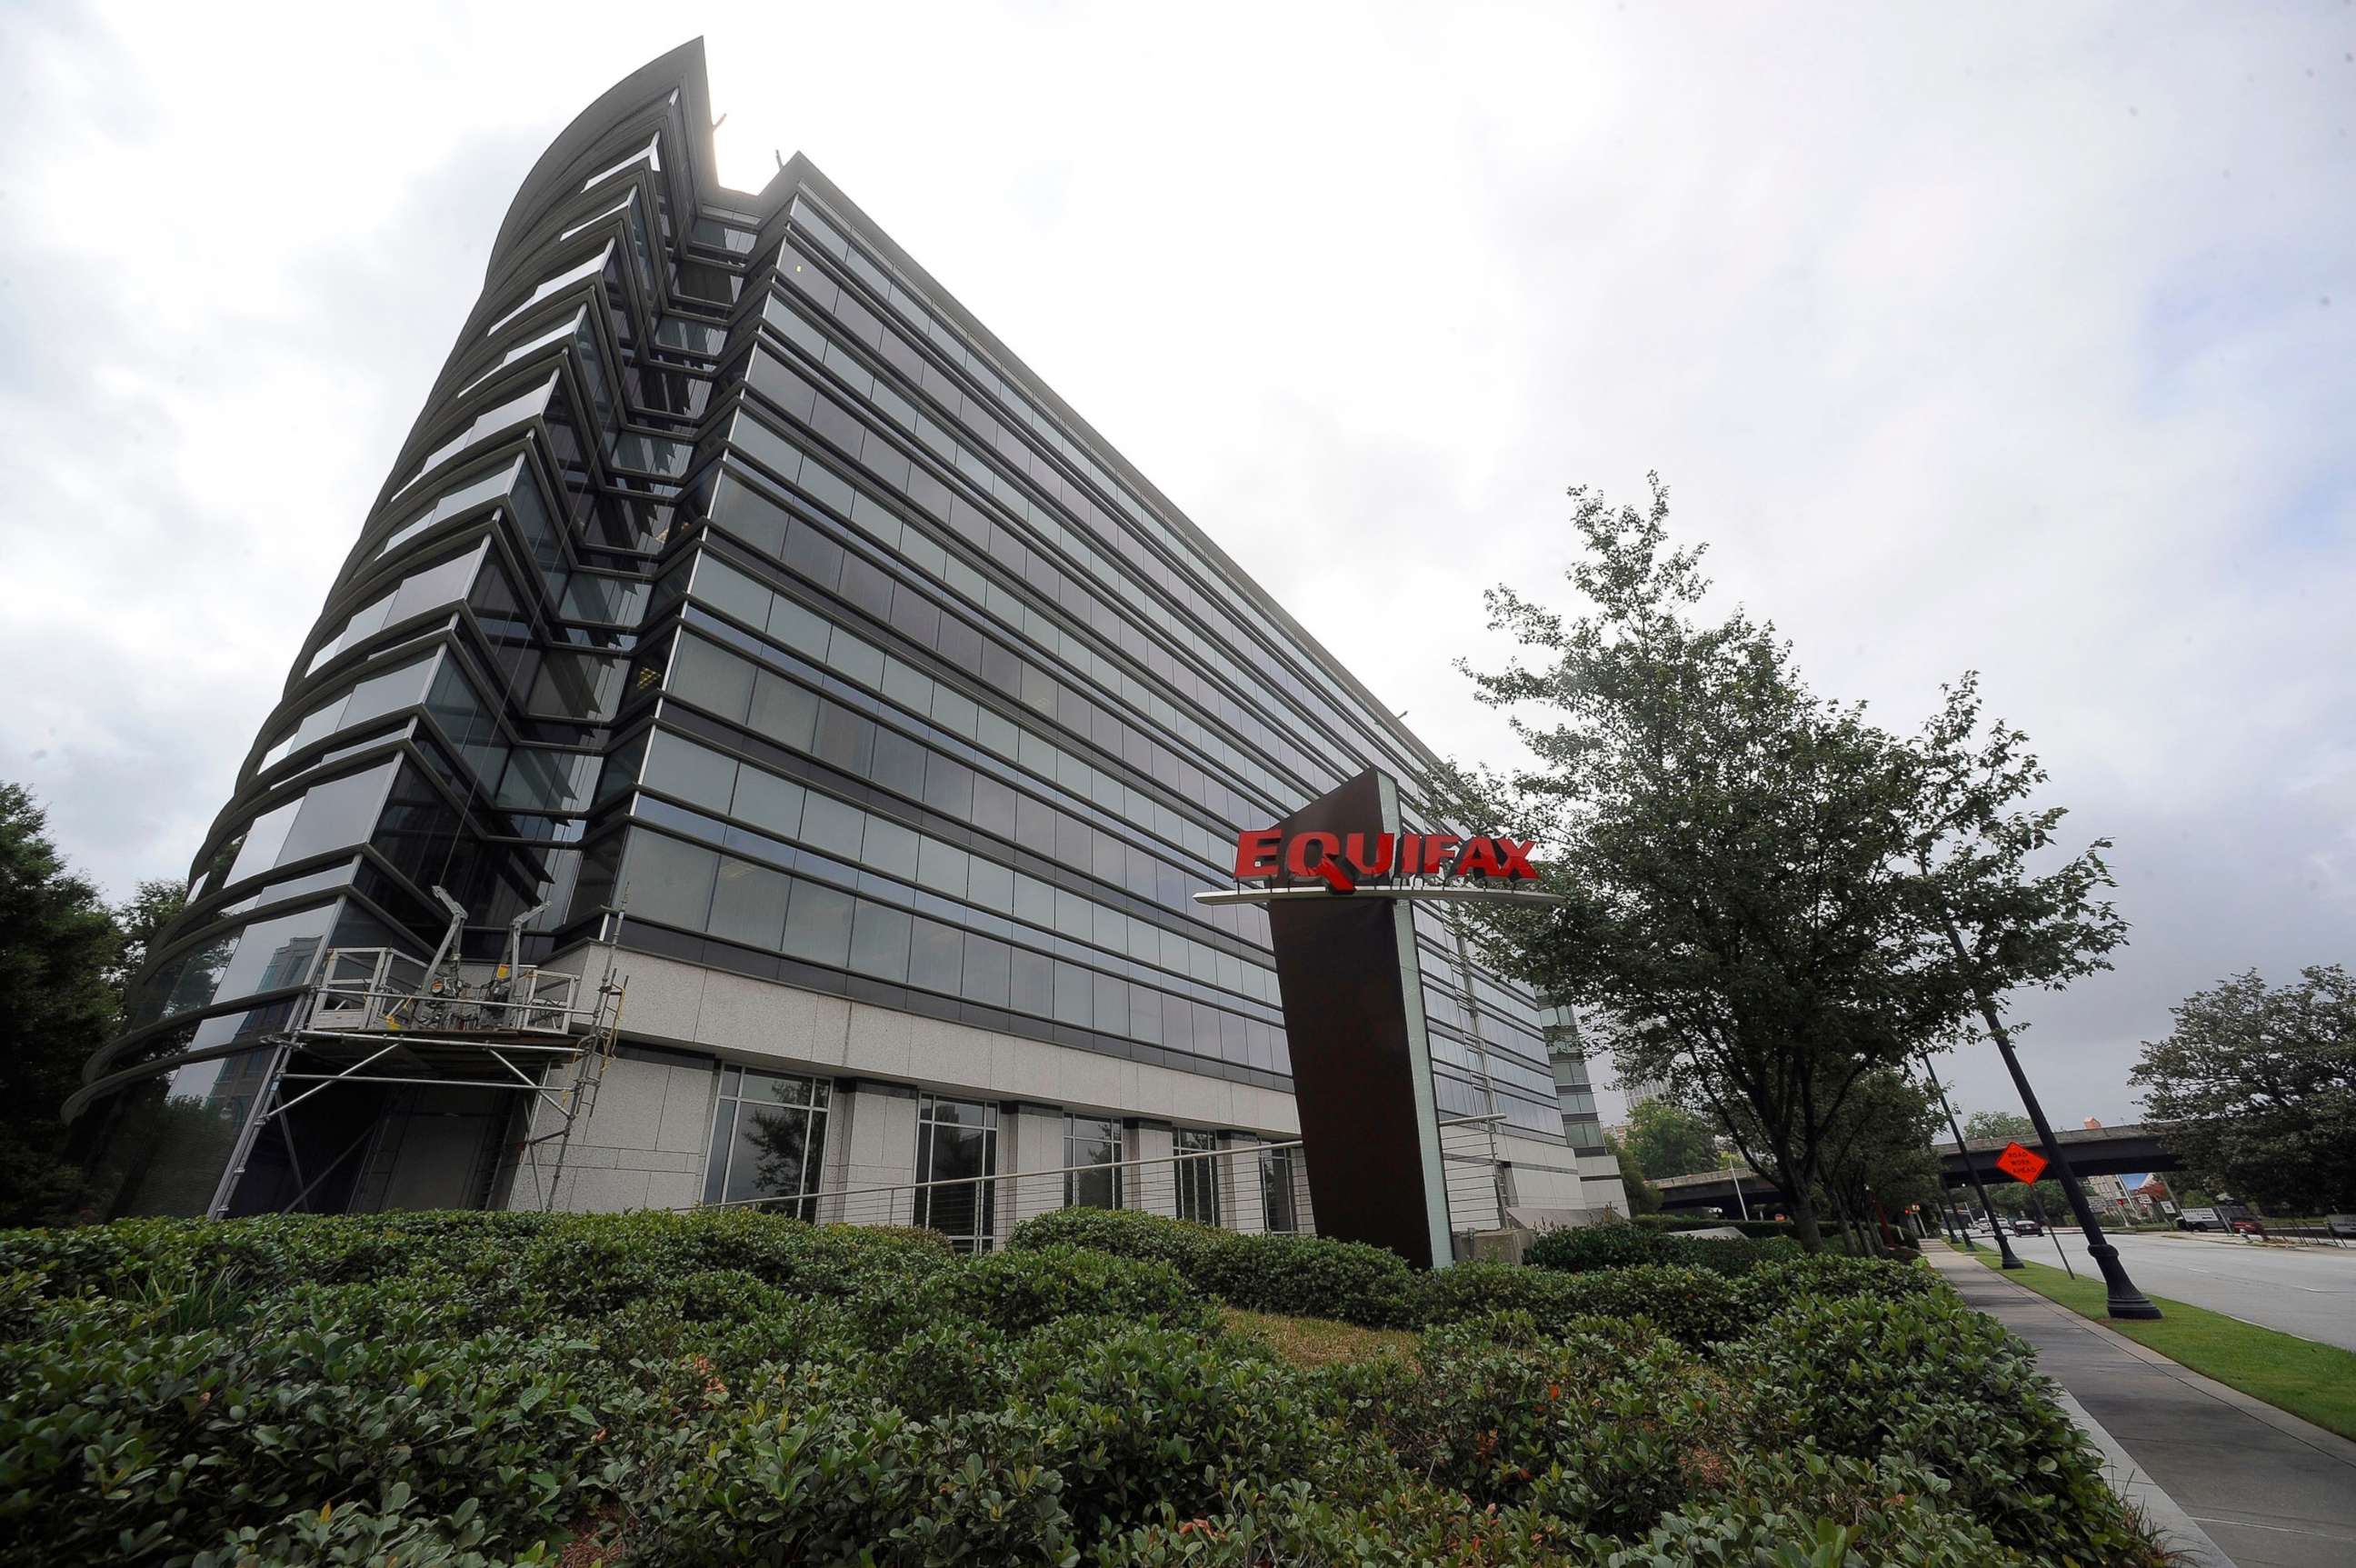 PHOTO: This July 21, 2012, file photo shows the corporate headquarters of Equifax Inc. in Atlanta.